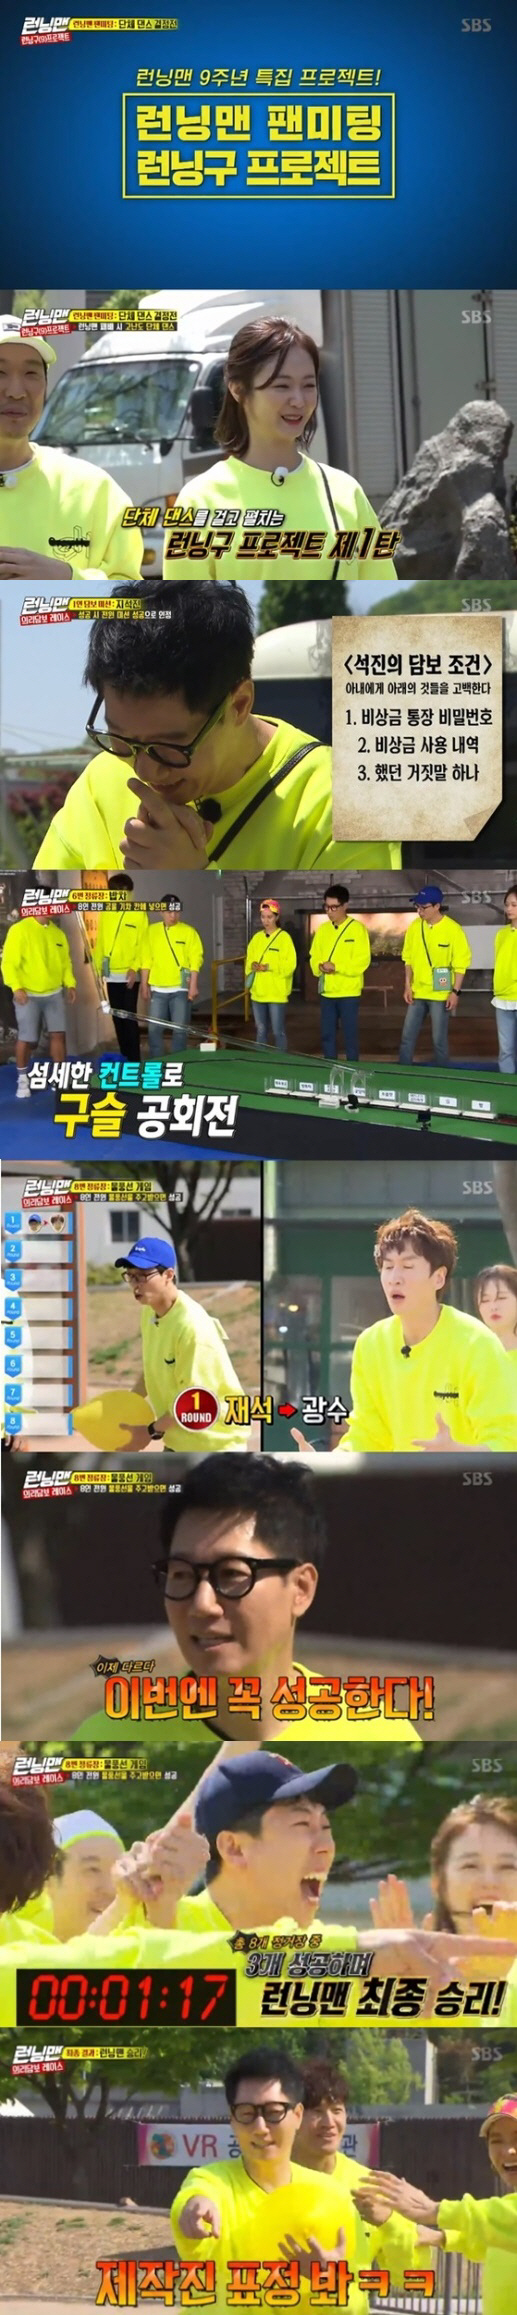 SBS Running Man first released the 9th anniversary special project Running Man Fan Meeting - Running Zone Project and the audience rating rose sharply.According to Nielsen Korea, the ratings agency, Running Man, which was broadcast on the 19th, ranked first in the overwhelming same time zone with 5.1% (based on the second part of the Seoul Capital Areas audience rating) in the 2049 target audience rating, which is an important indicator of major advertising officials.The average audience rating also rose, recording 5.3% in the first part and 8.4% in the second part (based on the audience rating of households in the Seoul Seoul Capital Area), and the highest audience rating per minute rose to 8.9%.As mentioned earlier, the Running Man 9th anniversary special project Running Man Fan Meeting ? Running Project was first released.The crew and members who had a special race for four weeks with the right to organize a fan meeting queue sheet played their first showdown with group dance on the broadcast.If the members win, they can dance in addition to the candidate dance prepared by the production team, but if they are defeated, they should dance recommended by the production team.The members were united in teamwork and started a fierce 8th round confrontation with the production team, eventually winning three wins and winning the victory.The scene had the highest audience rating of 8.9% per minute, accounting for the best one minute.